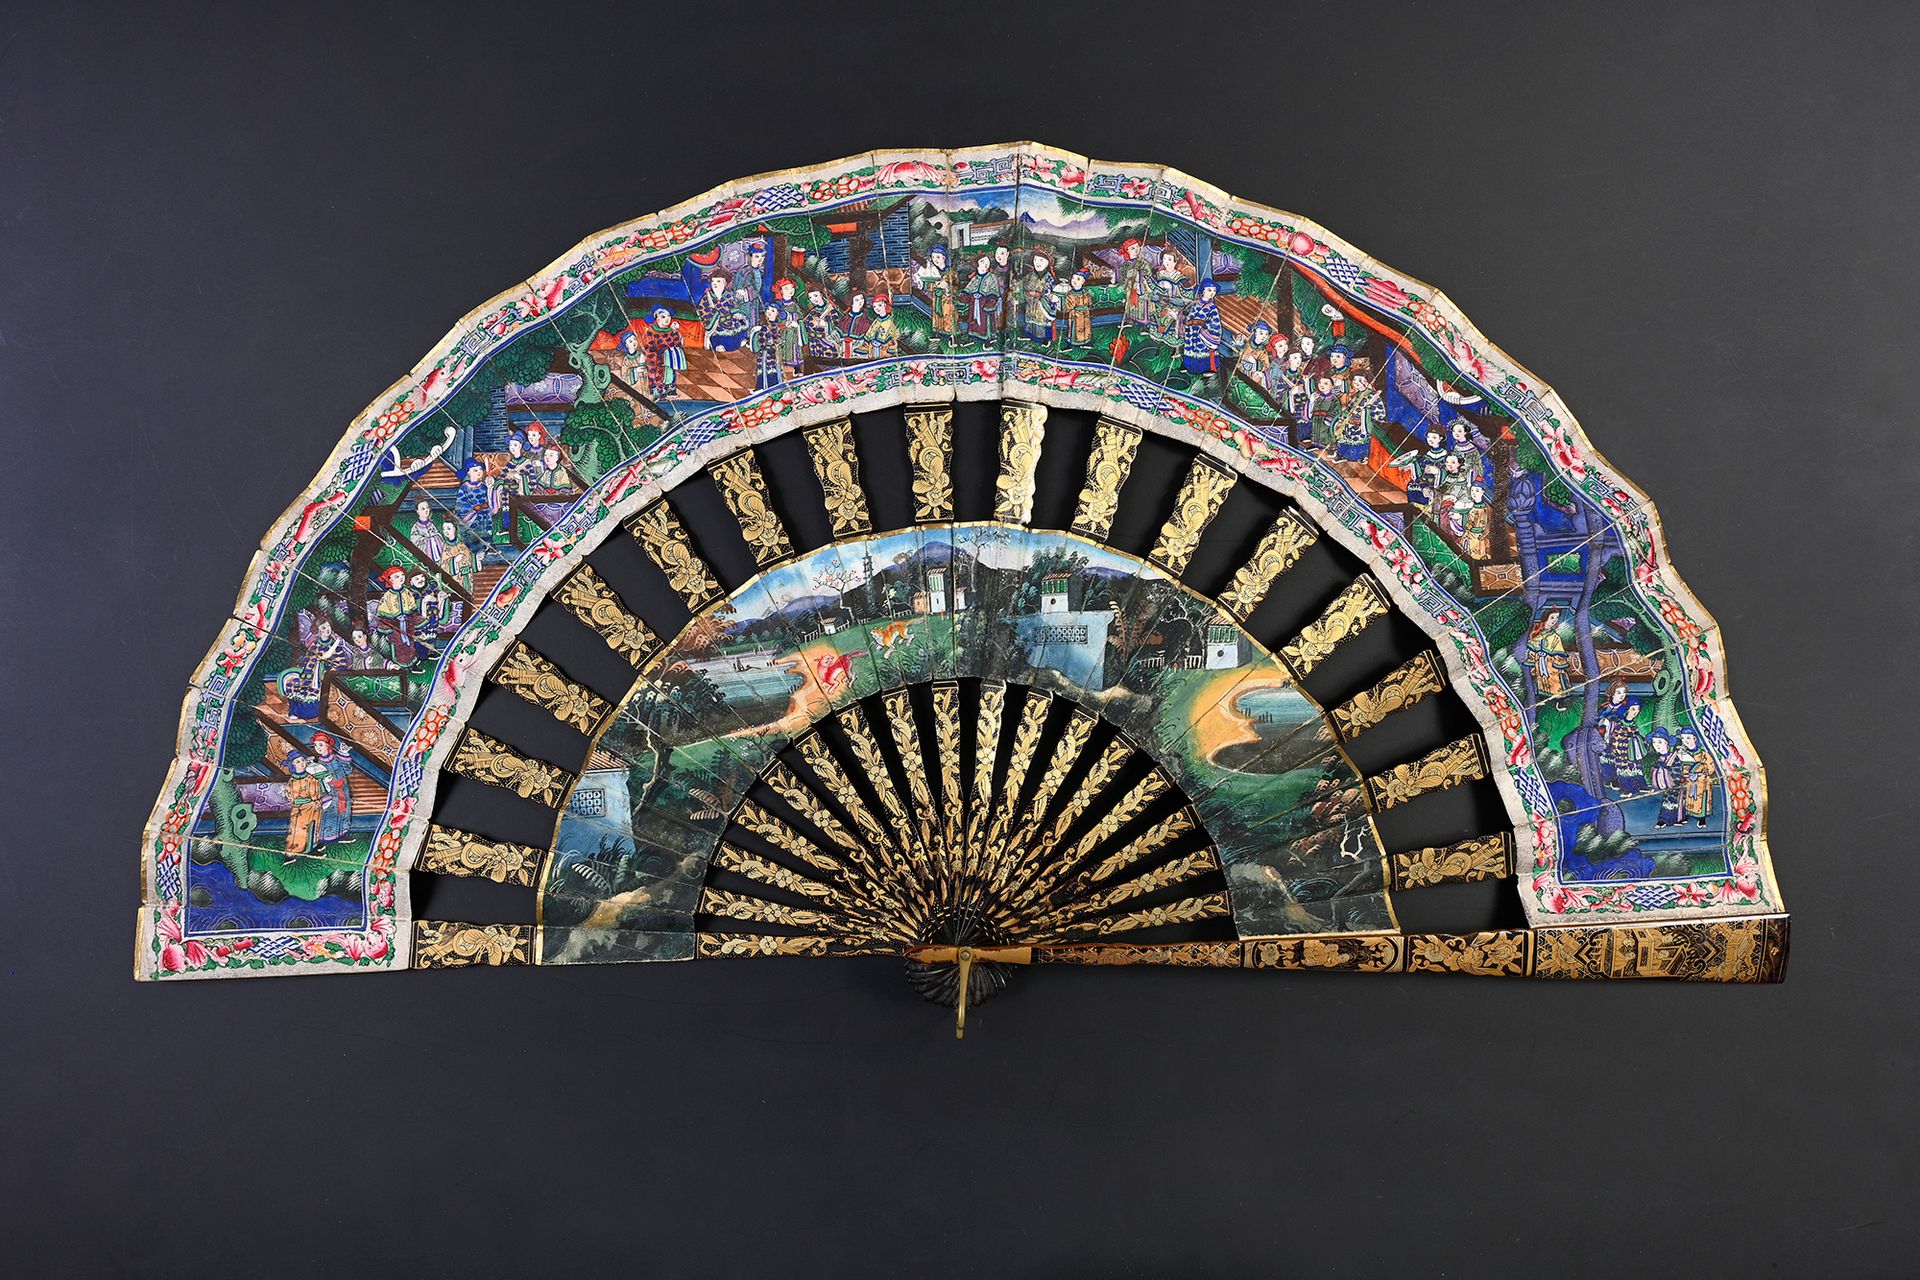 Null Convertible, China, 19th century
Folded fan, the paper sheet painted on the&hellip;